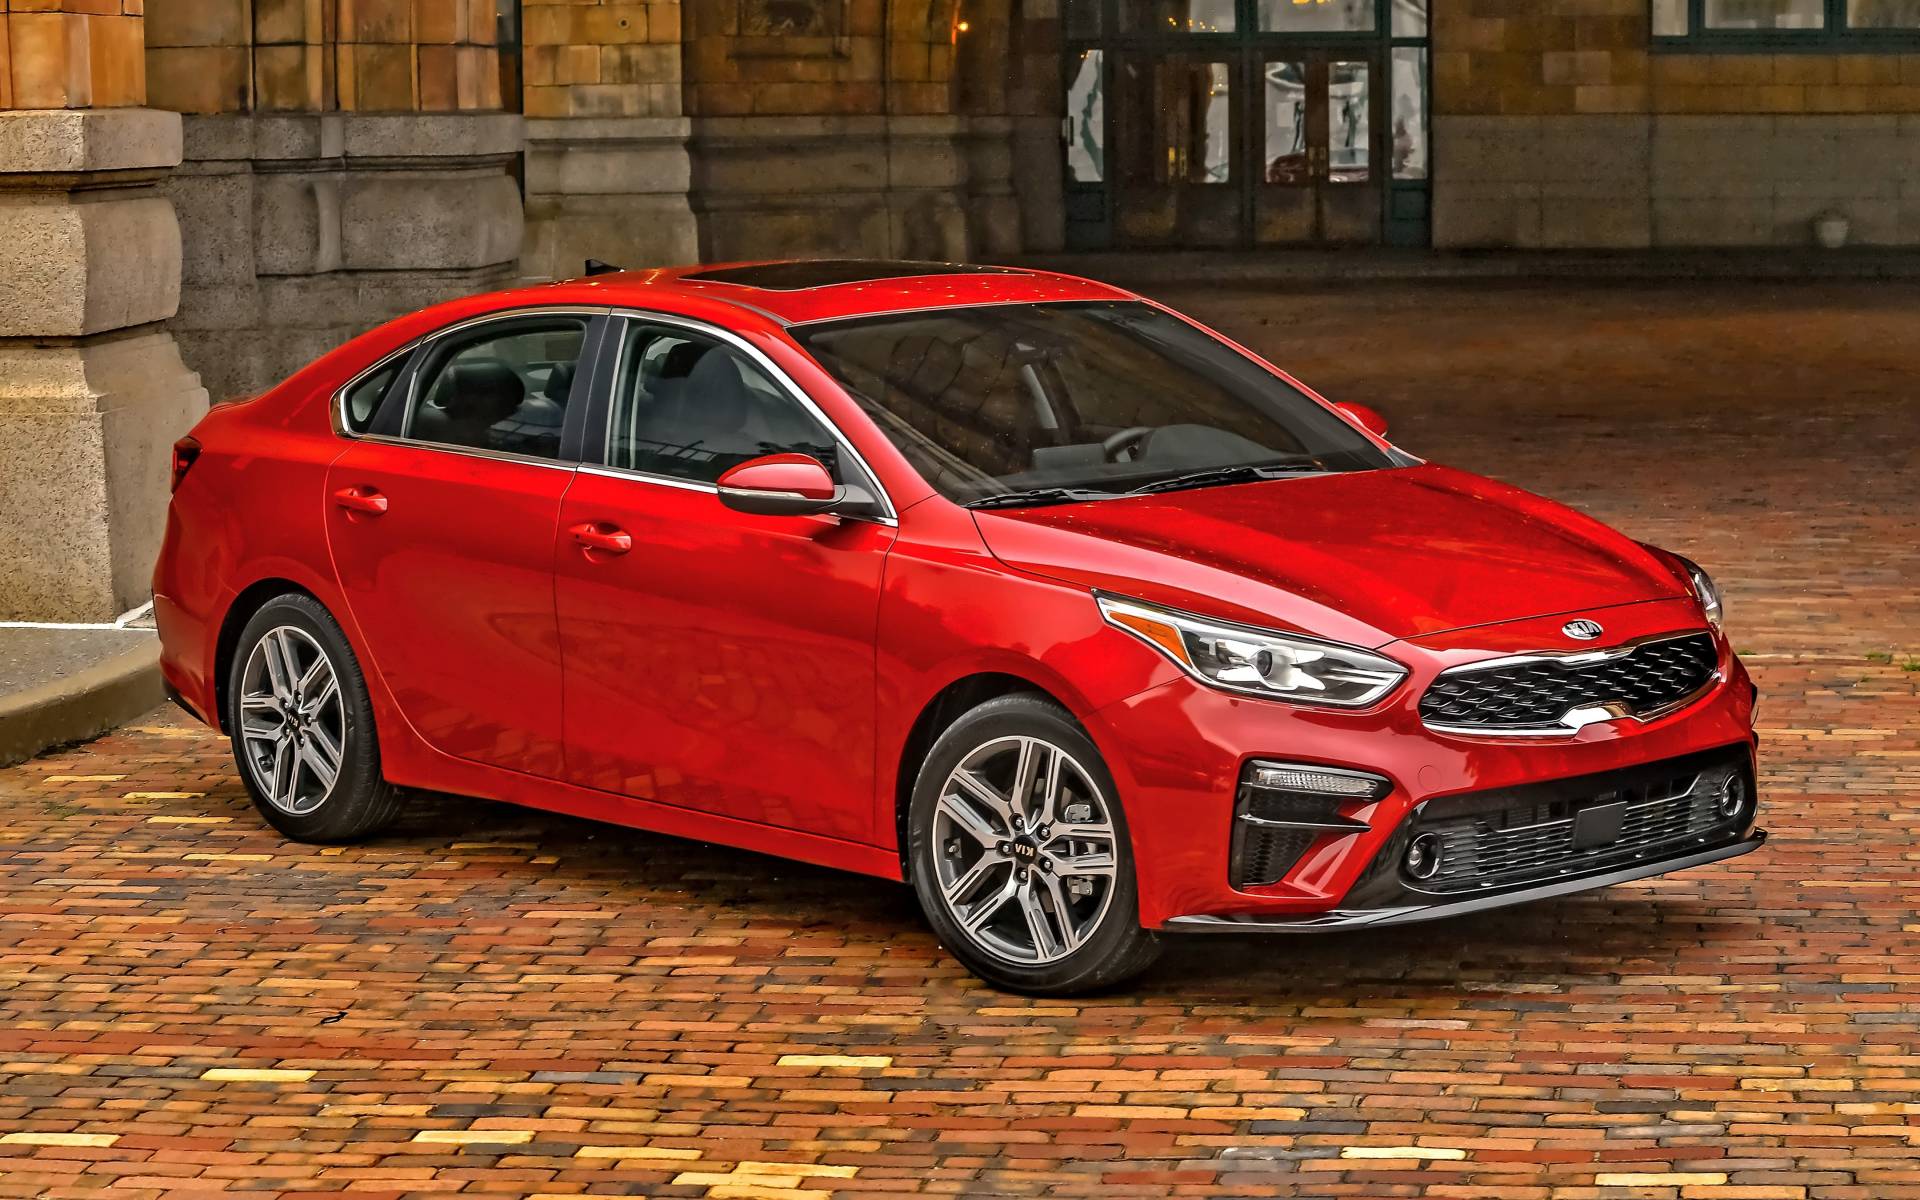 2020 Kia Forte LX (man) Price & Specifications - The Car Guide